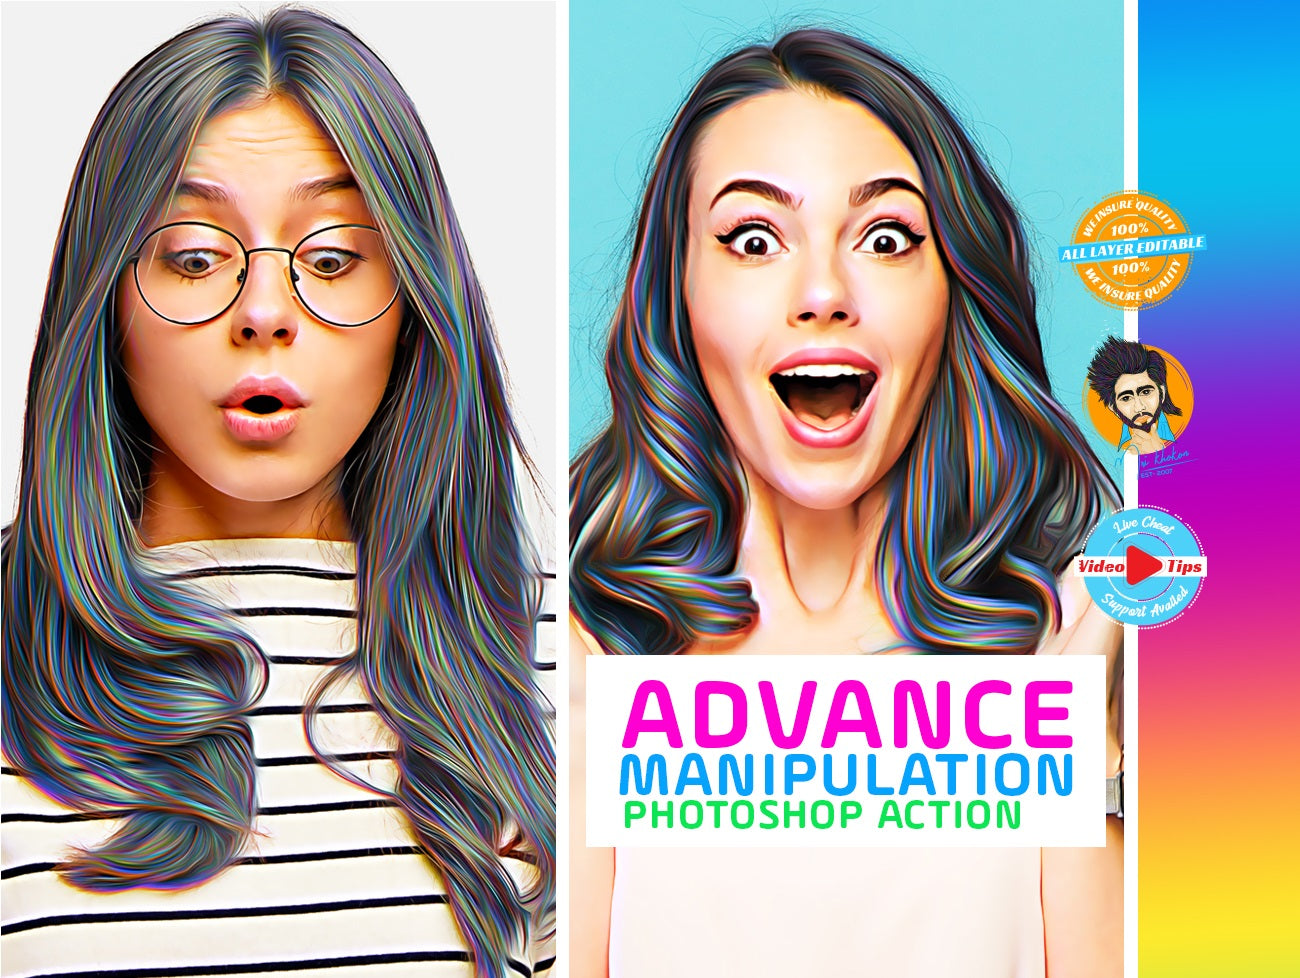 The Charming Bundle of Photoshop Actions and Templates